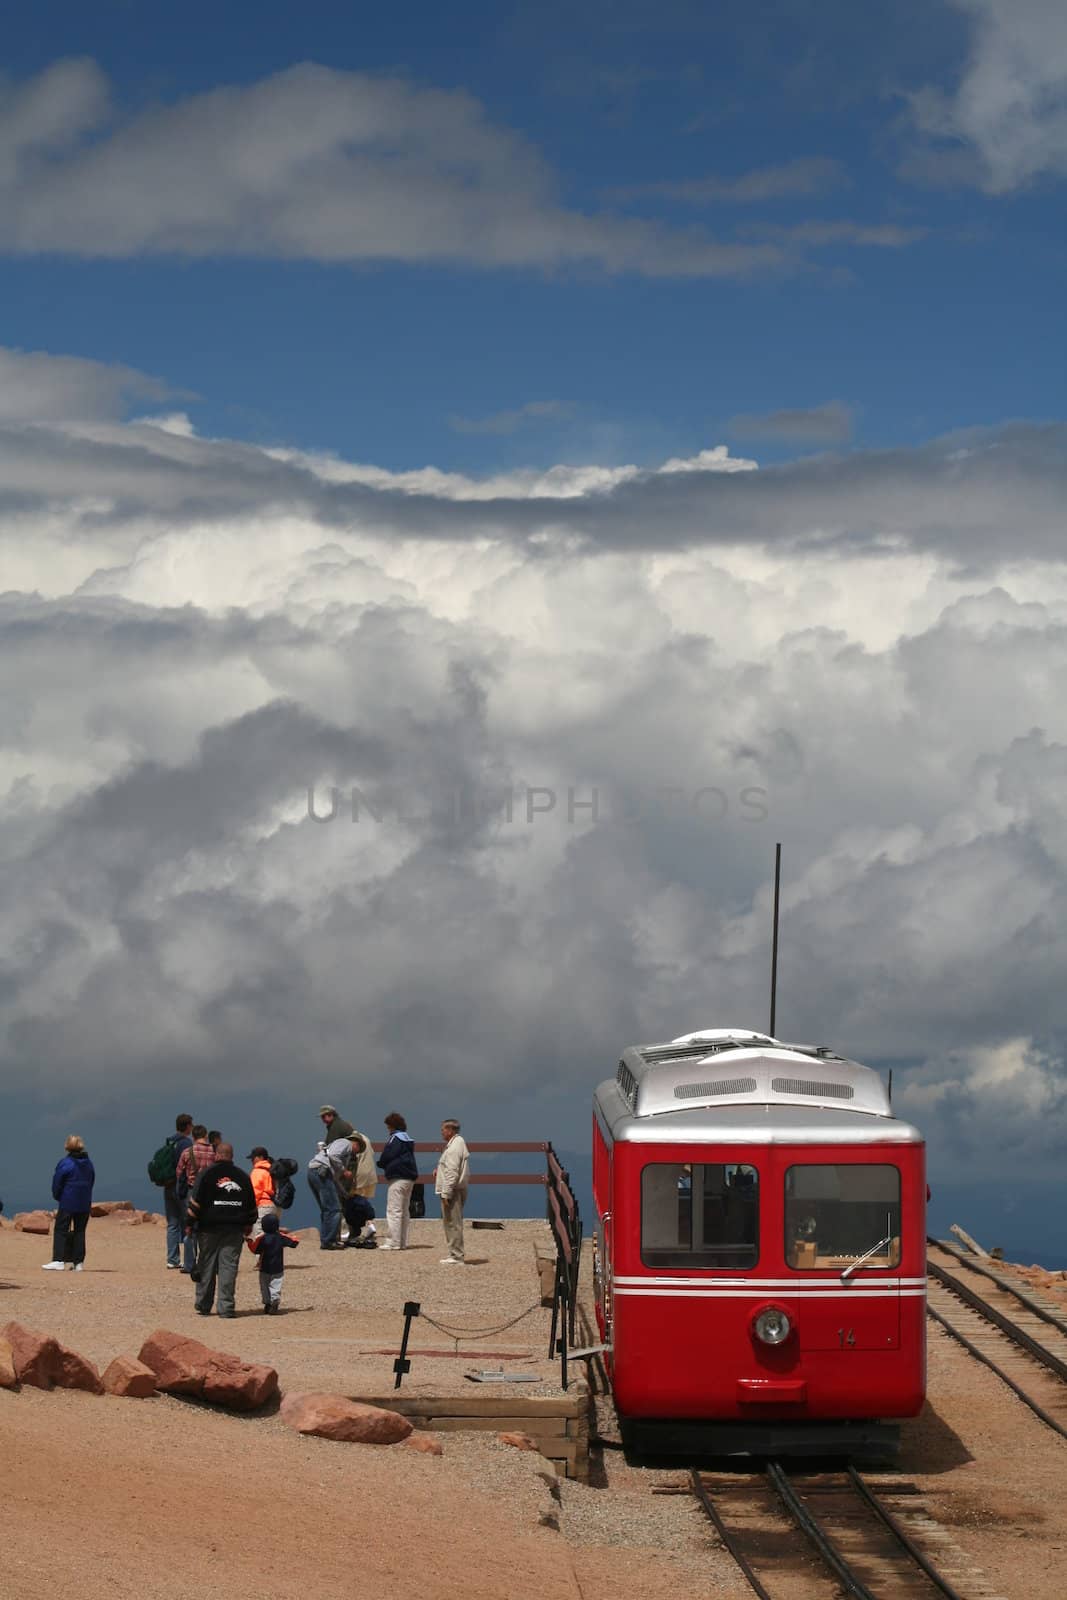 The cog railway taking visitors above the clouds on Pikes Peak.